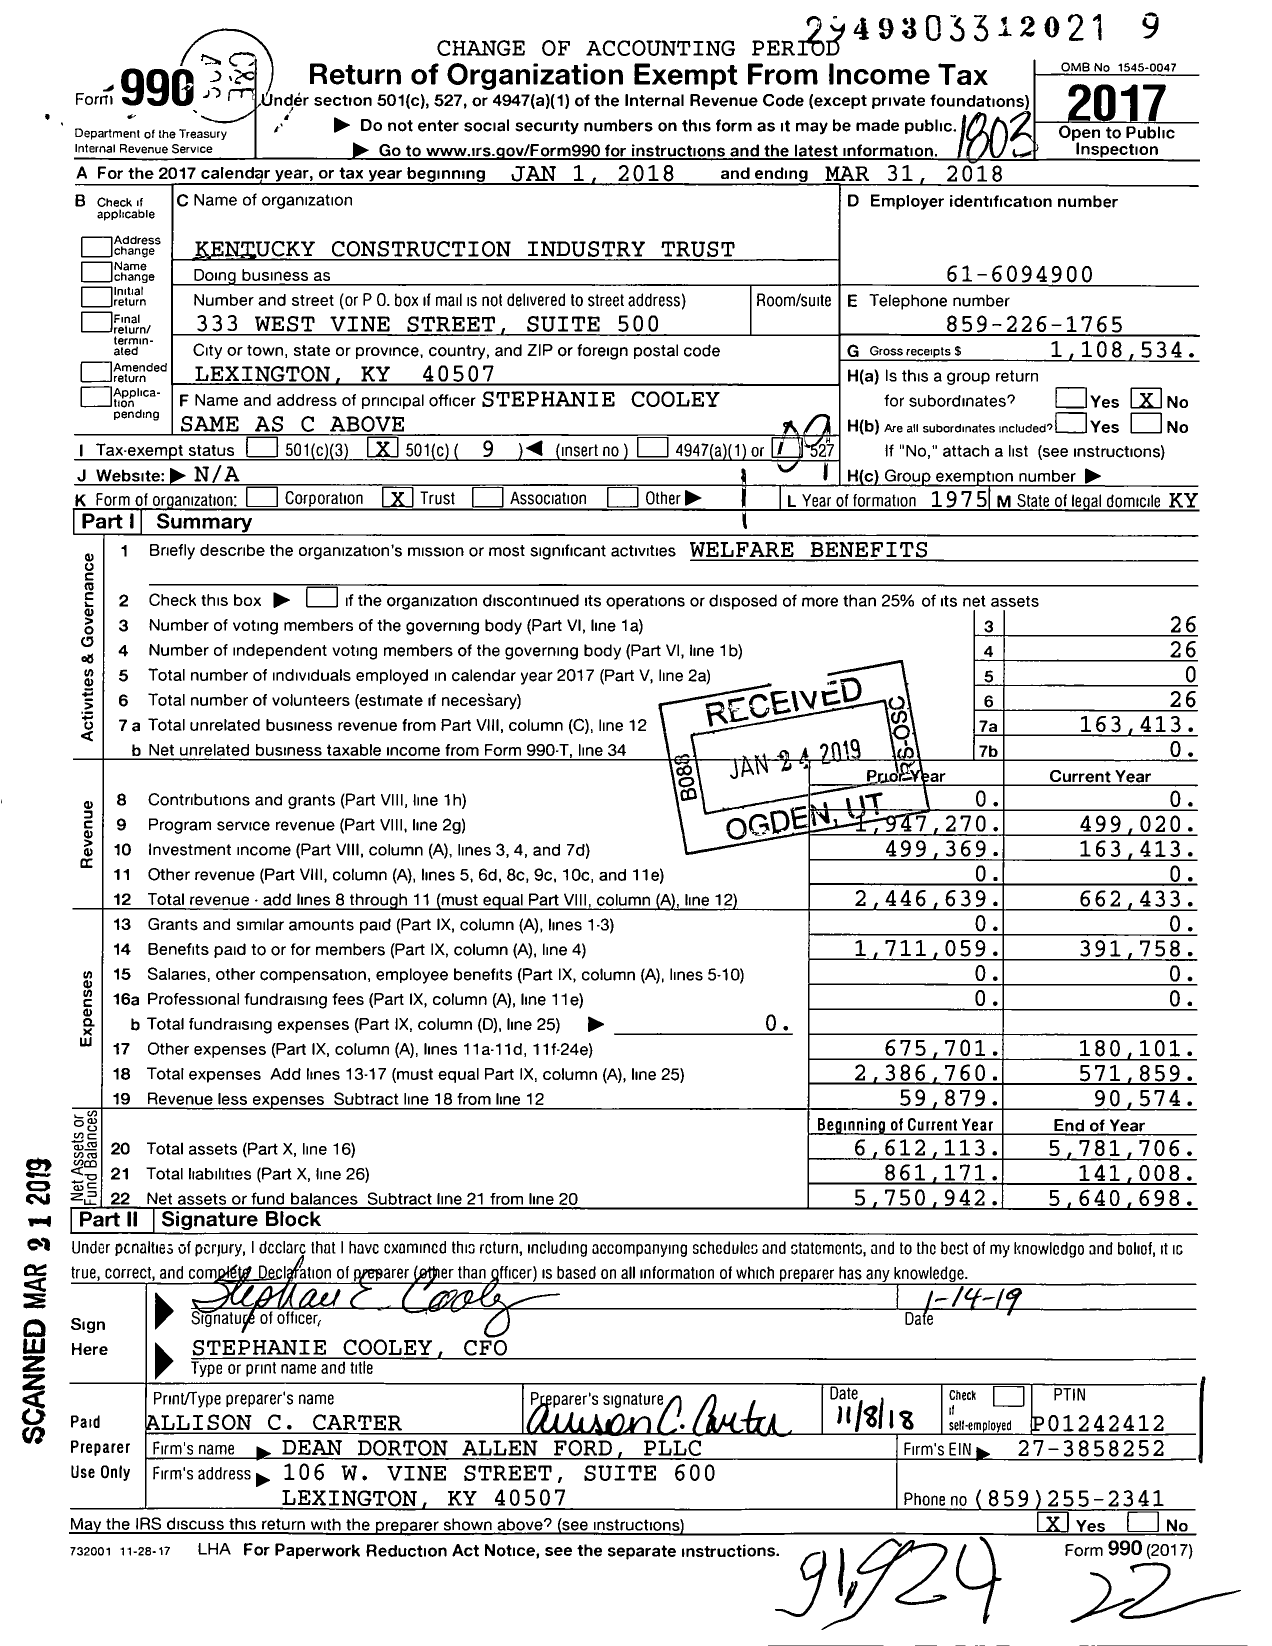 Image of first page of 2017 Form 990O for Kentucky Construction Industry Trust